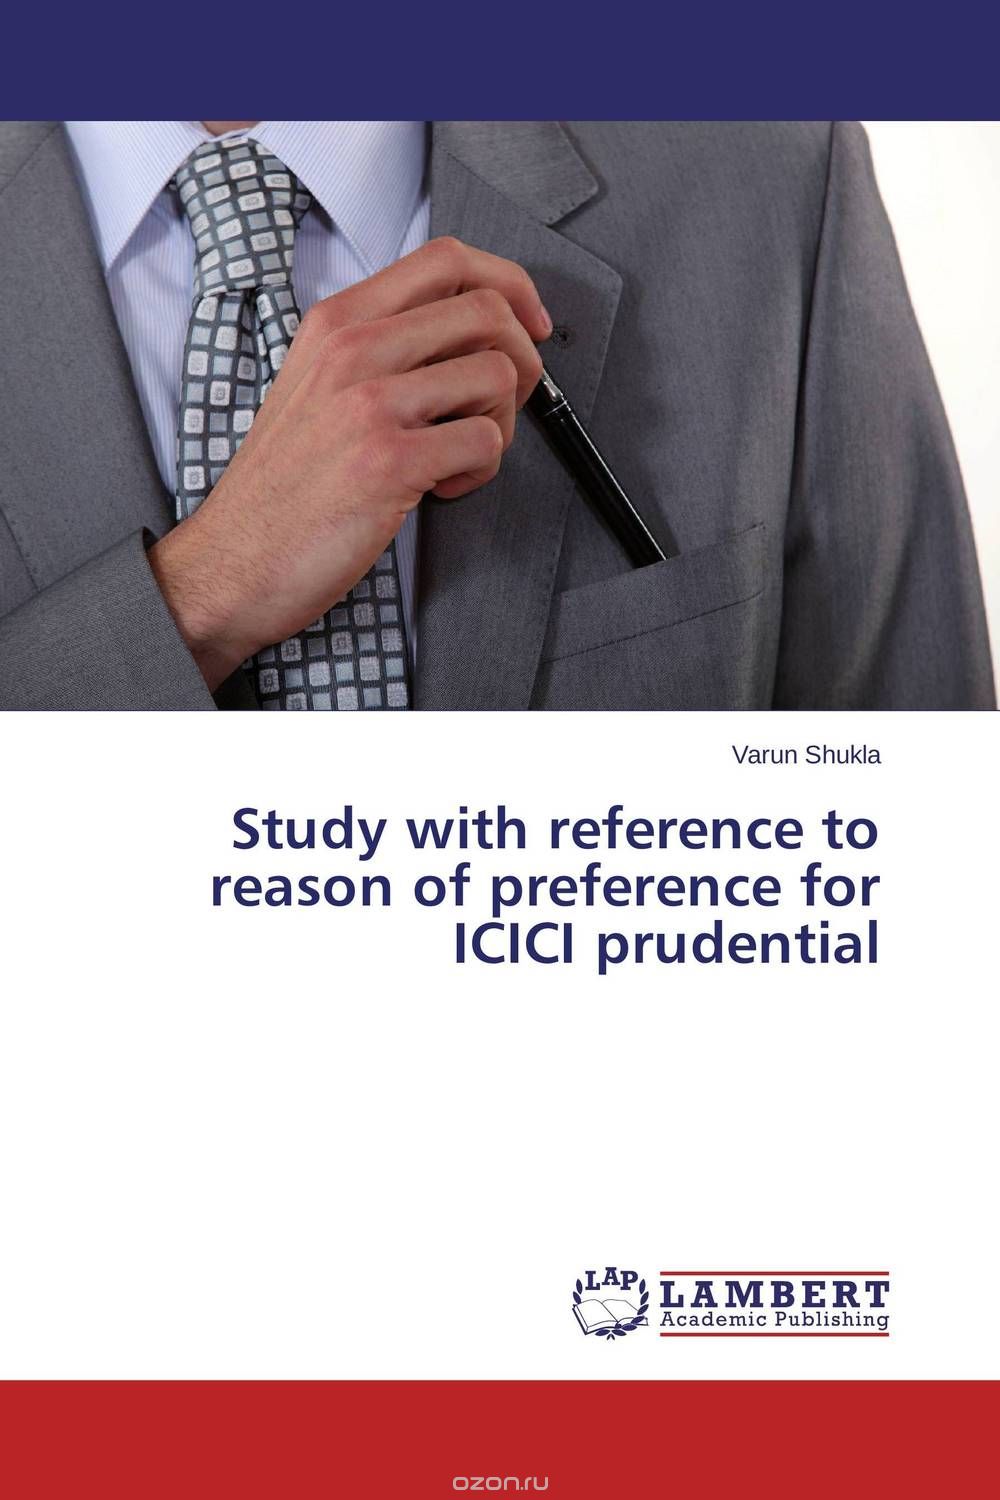 Study with reference to reason of preference for ICICI prudential